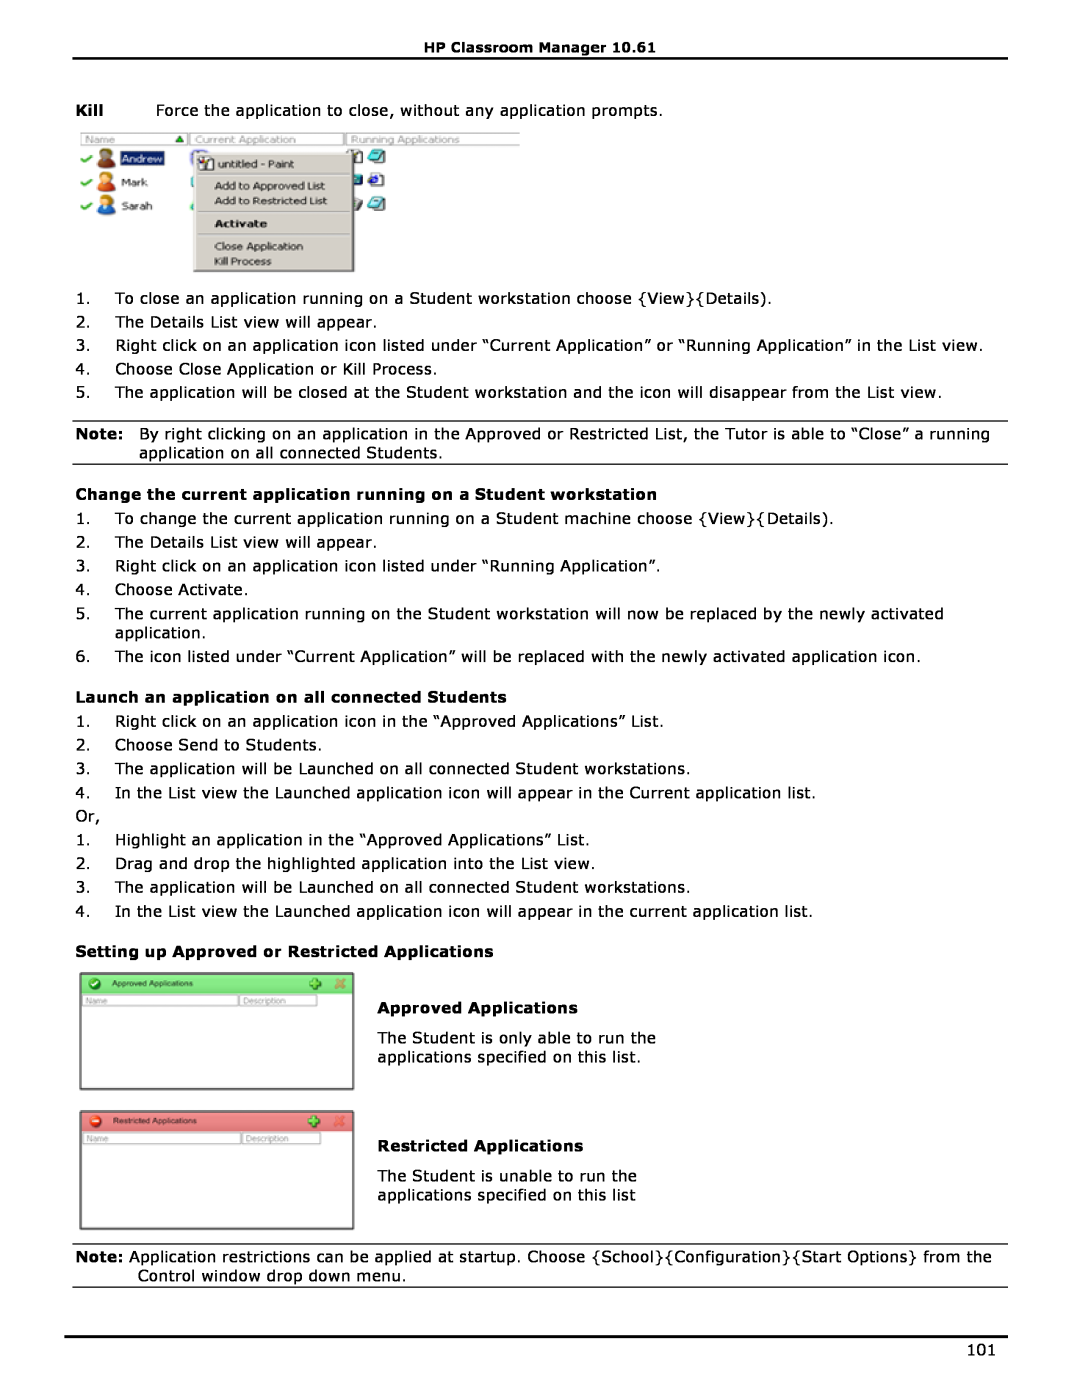 HP Classroom Manager manual Change the current application running on a Student workstation, Restricted Applications 